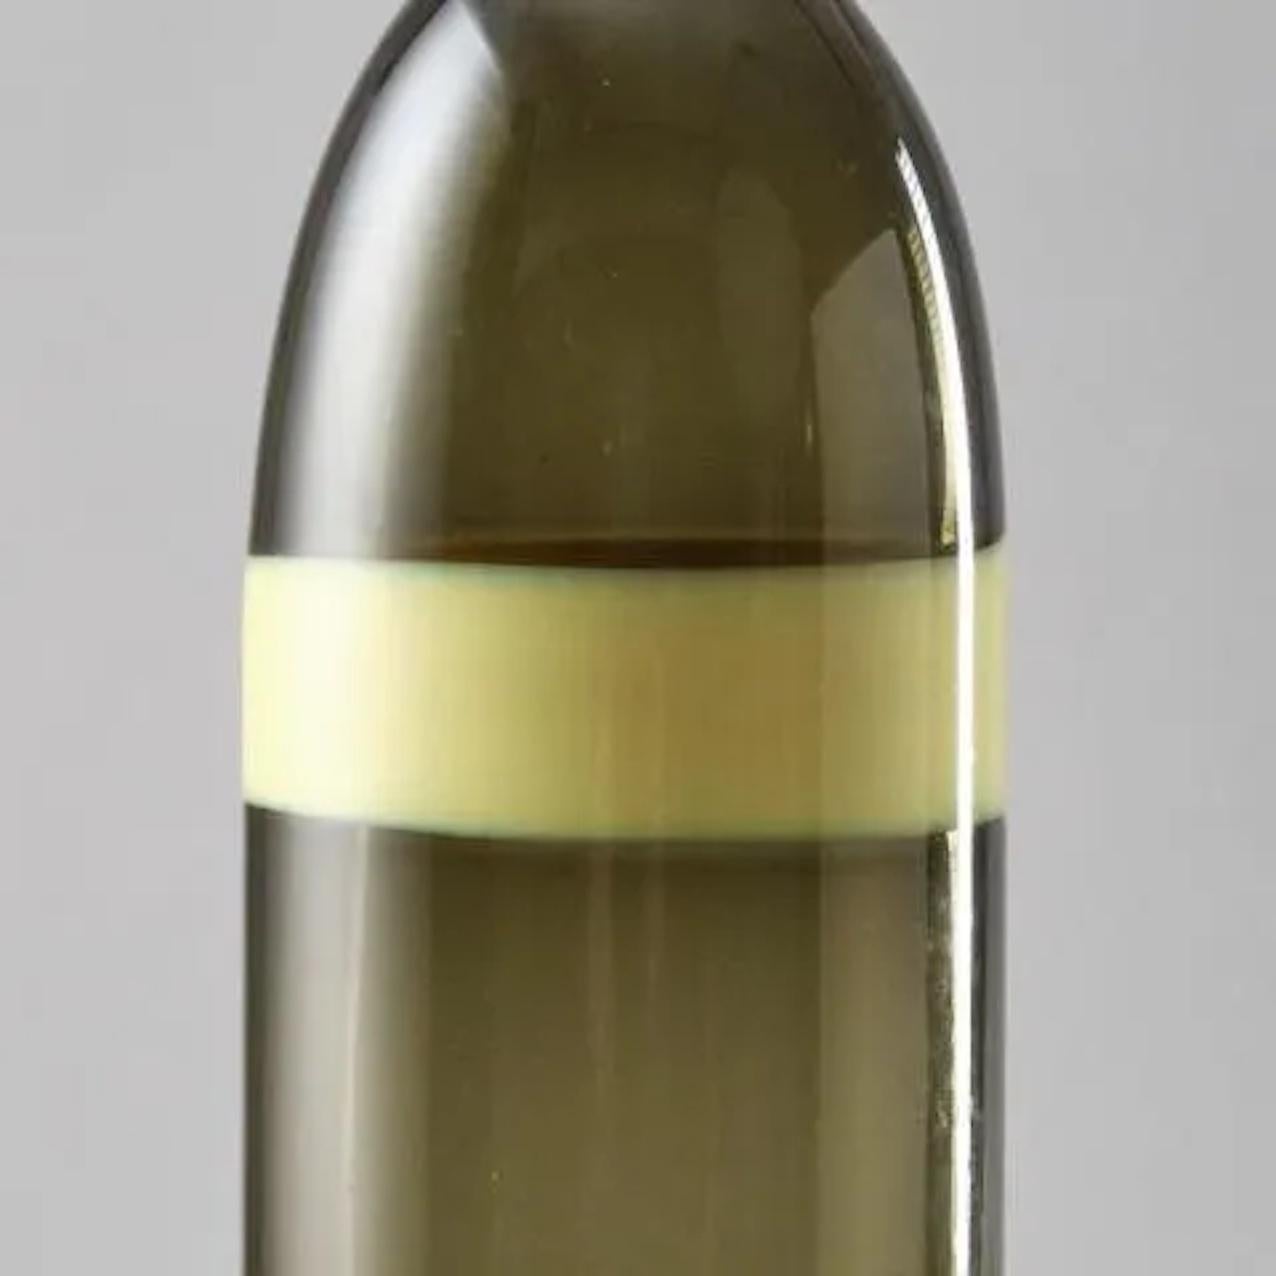 Yellow and Green Glass Bottle by Fulvio Bianconi for Venini. Signed on the underside of the base: Bianconi Venini. Italy: circa 1950 Bianconi’s real contribution to the world of art and design, however, finds its inception in 1947 when the Milanese